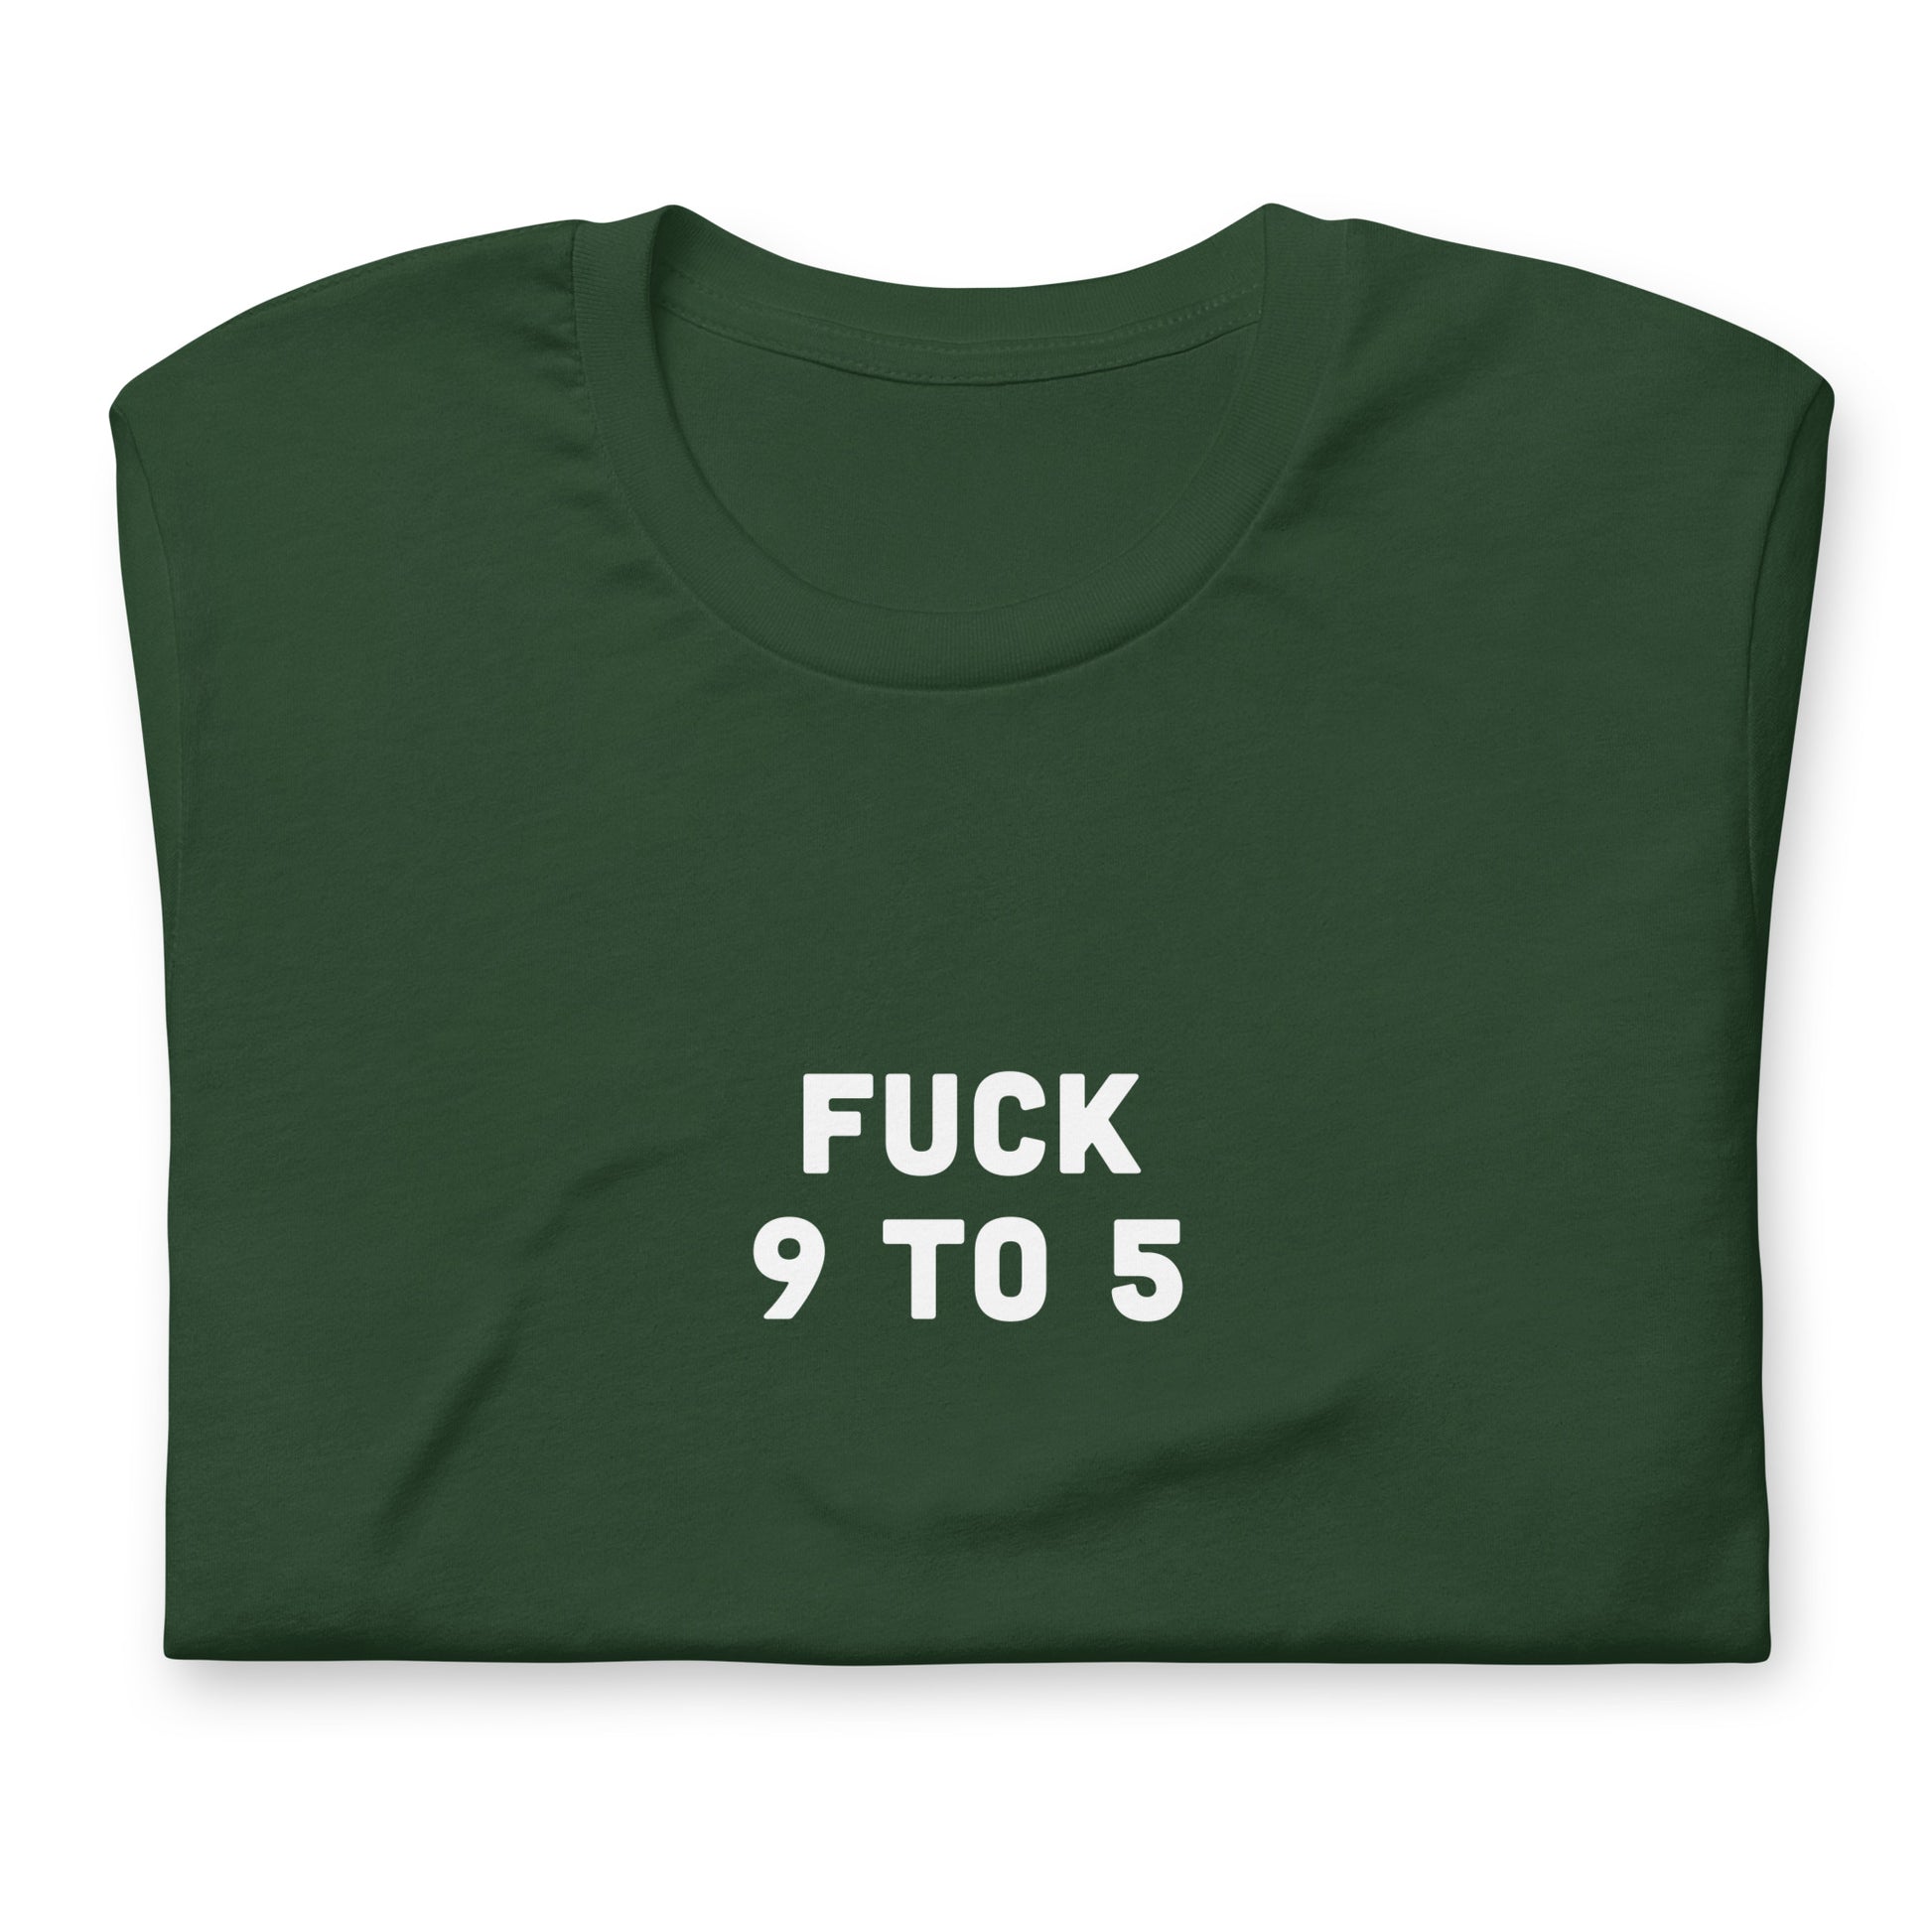 Fuck 9 To 5 T-Shirt Size XL Color Black